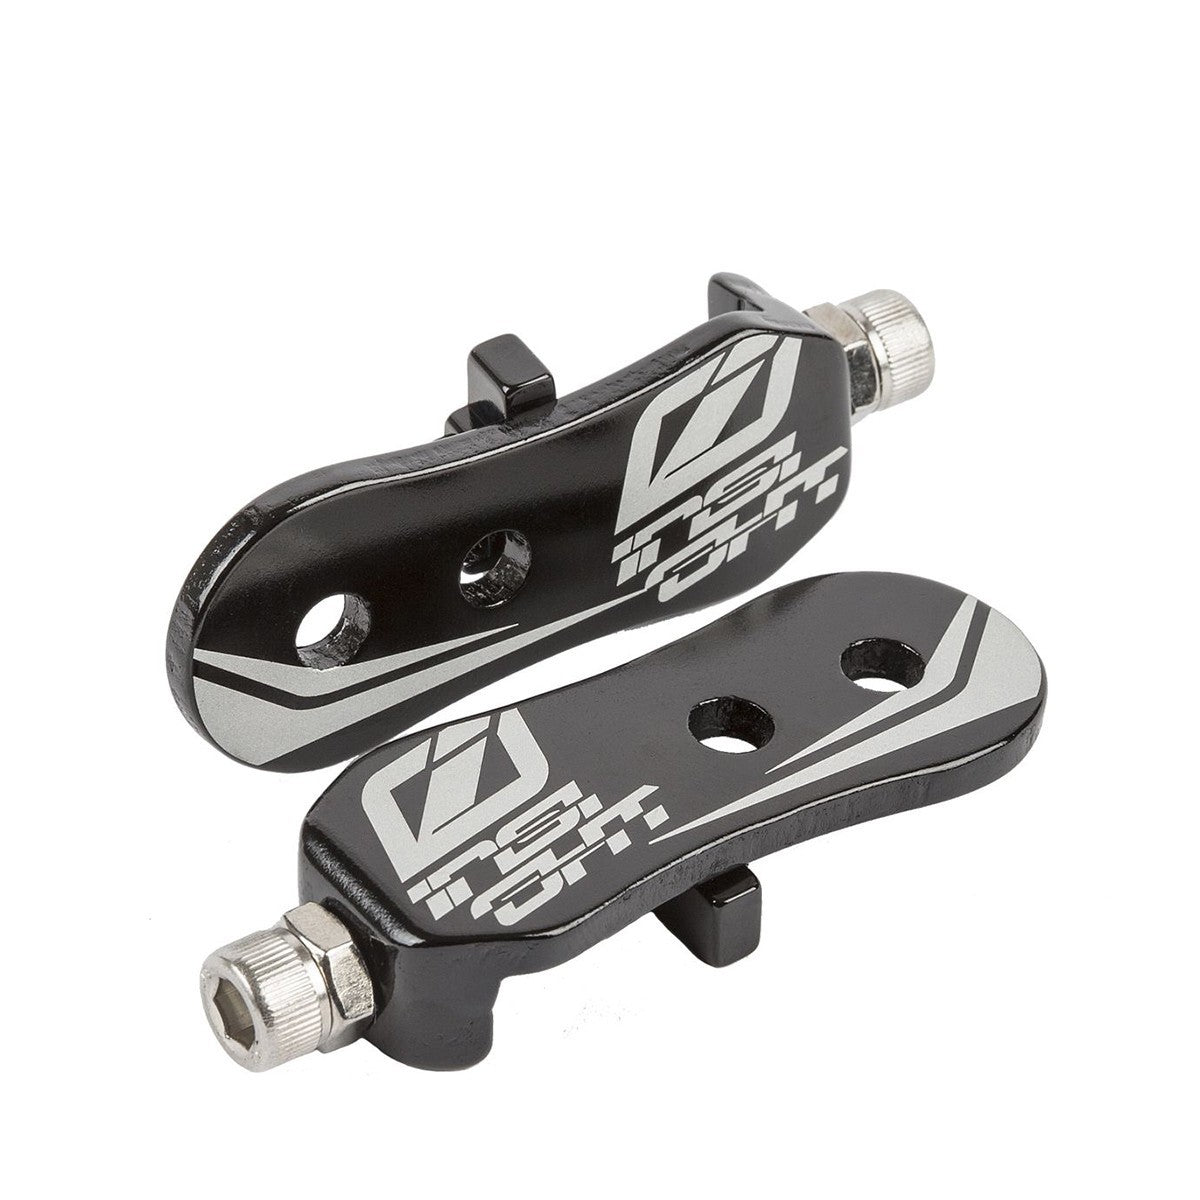 Insight Mini Chain Tensioner - 6mm - Downtown Bicycle Works 